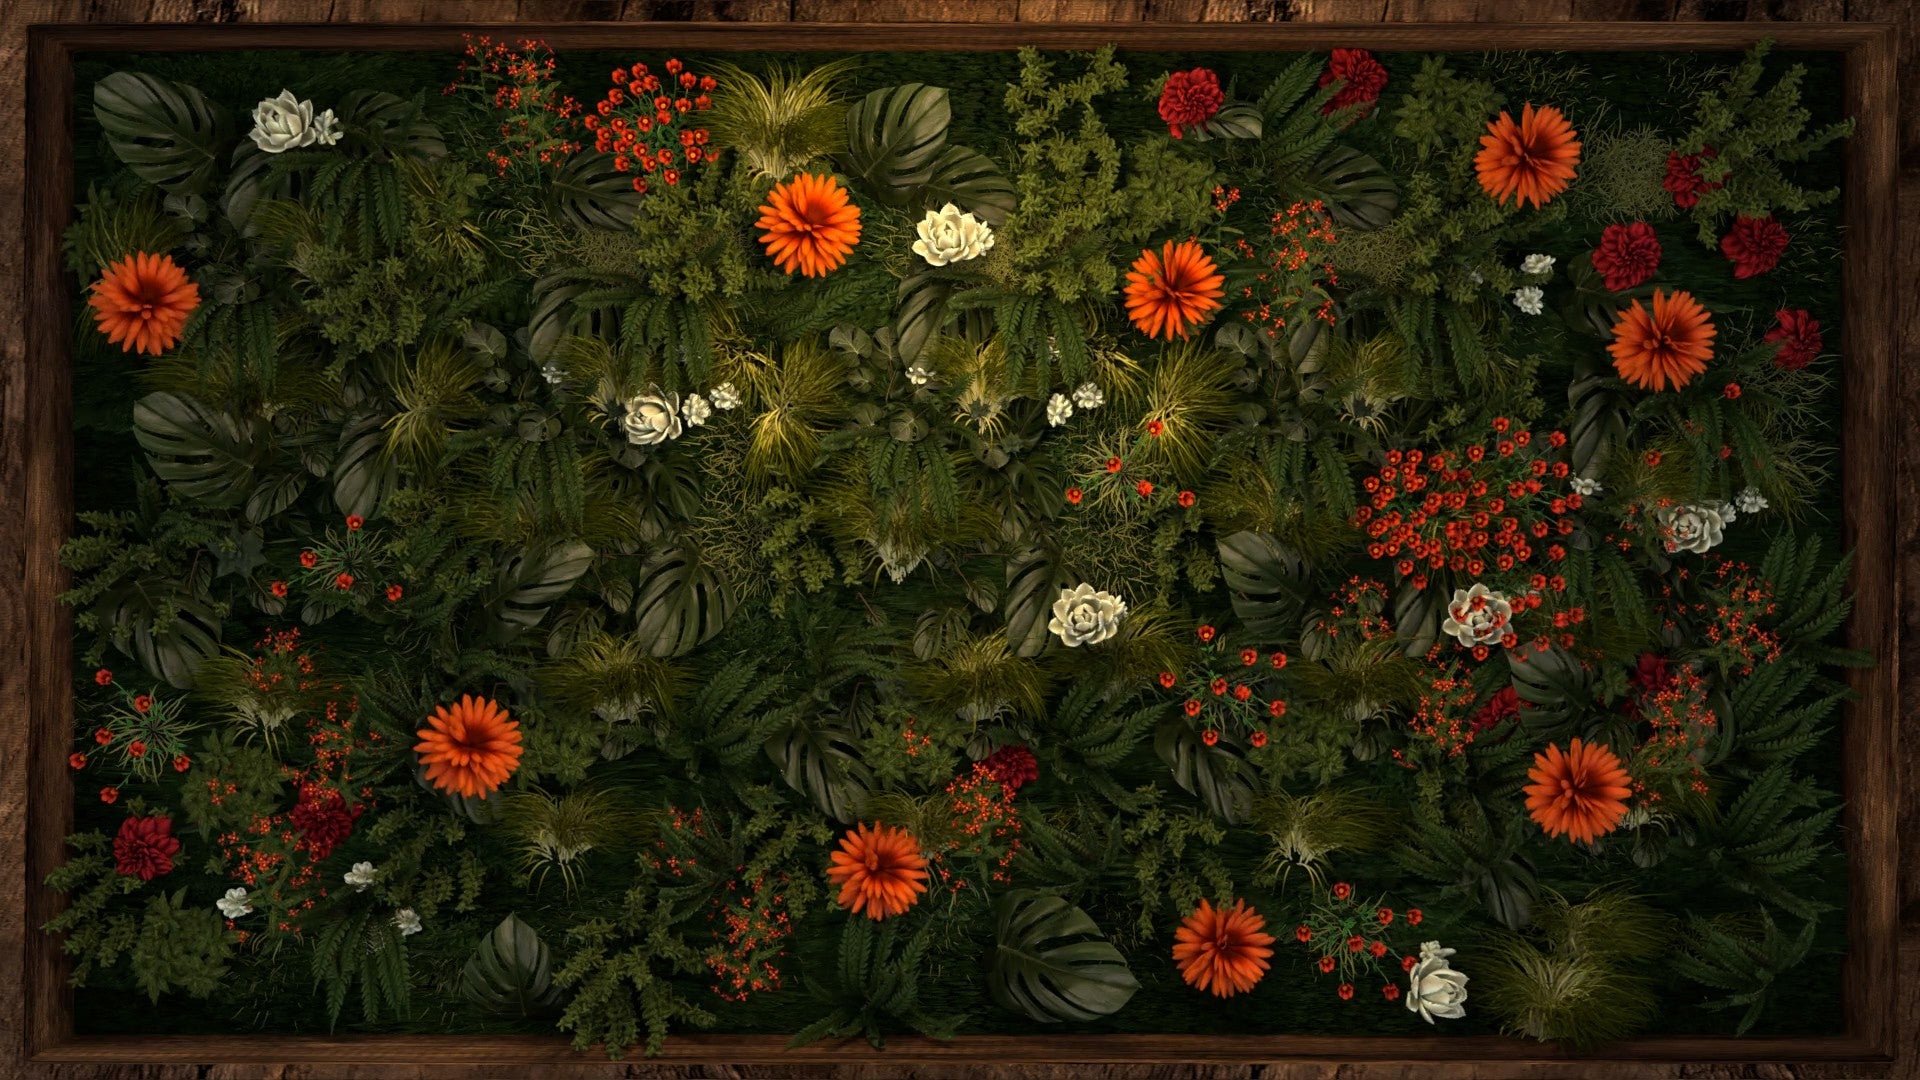 Thumbnail representing a video art creation, illustrating a richly detailed living wall with a variety of lush greenery and interspersed bright flowers, conveying a sense of vitality and natural diversity.